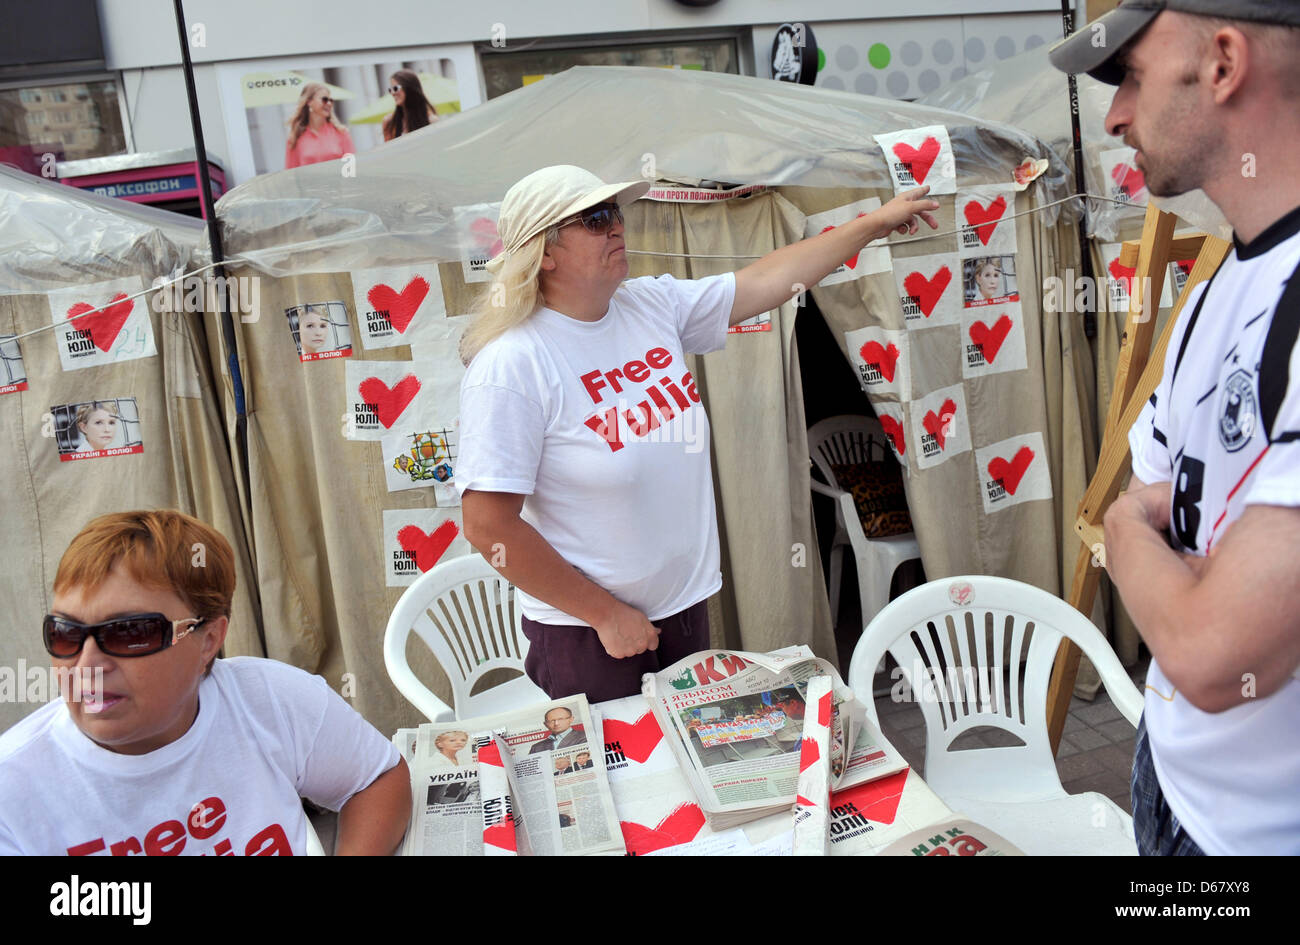 An activist stands in front of photos of the Ukranian politician Yulia Tymoshenko in a protest camp in downtown Kiev, Ukraine, 30 June 2012. The Euro 2012 championships were discussed controversially over the case of Ukraine's jailed former Prime Minister Yulia Tymoshenko. Photo: ANDREAS GEBERT Stock Photo